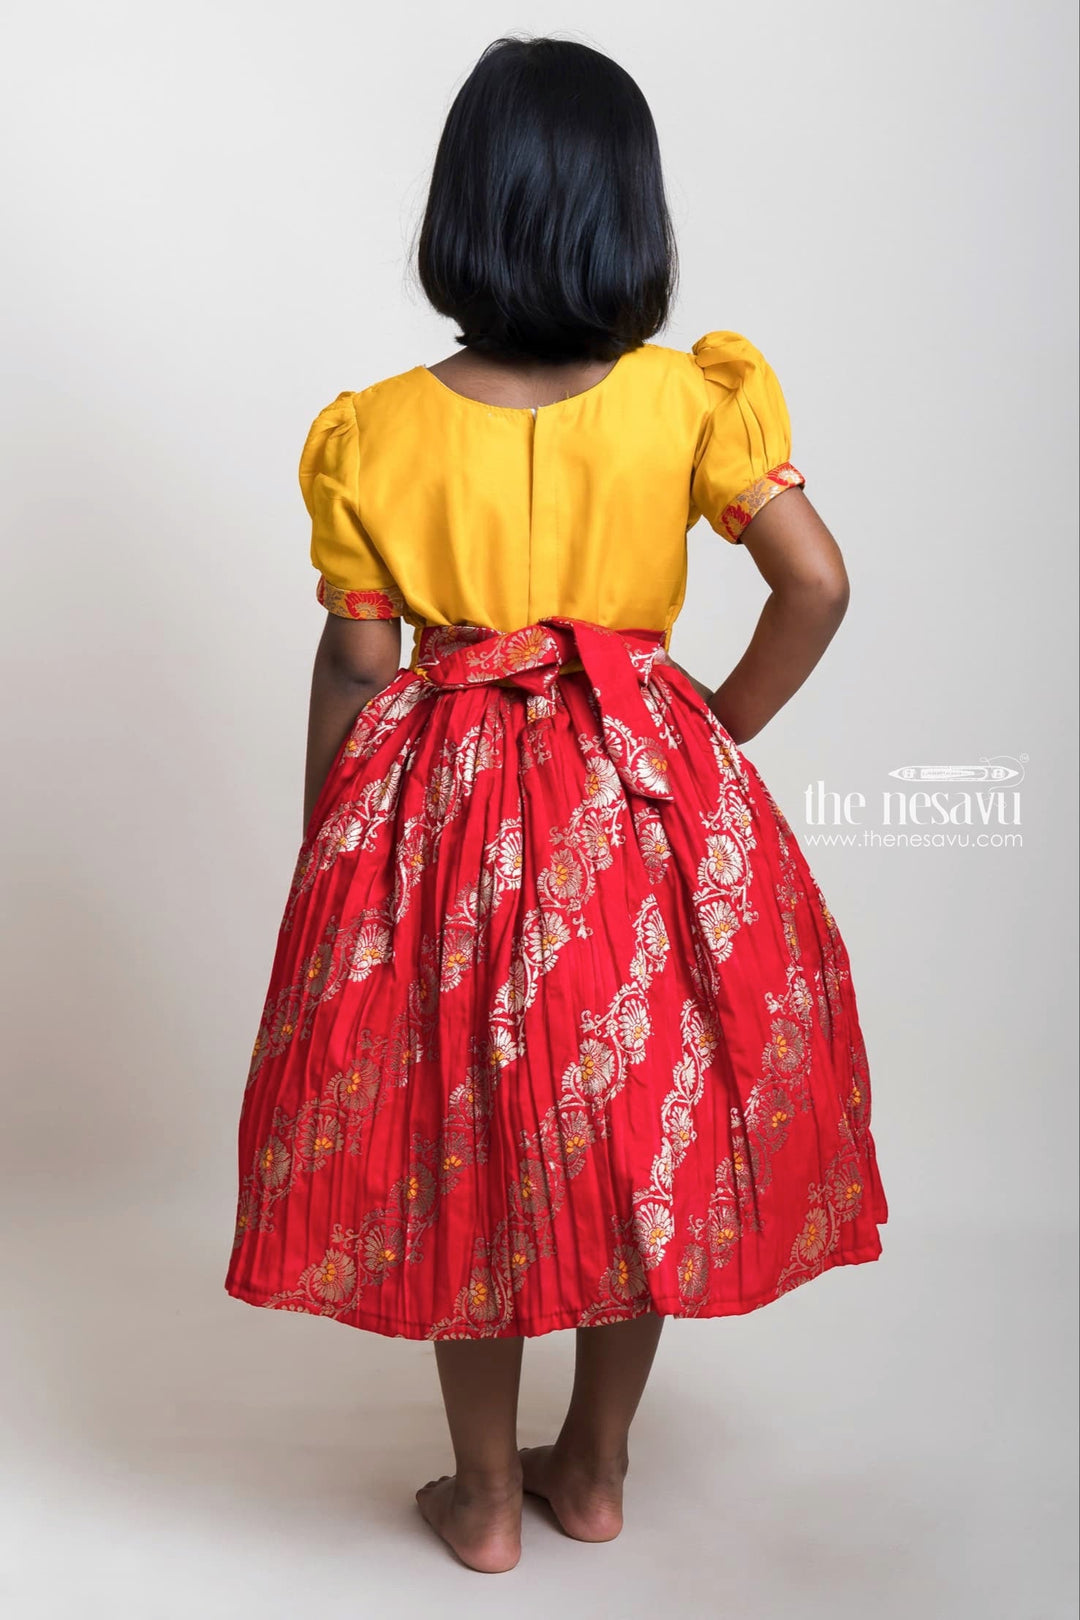 The Nesavu Silk Party Frock Embroidered Yellow Yoke And Red Brocade Printed Semi-Silk Frocks For Girls Nesavu Banarasi Silk Frocks For Girls 2023| Pongal And Sankranti Collection| The Nesavu